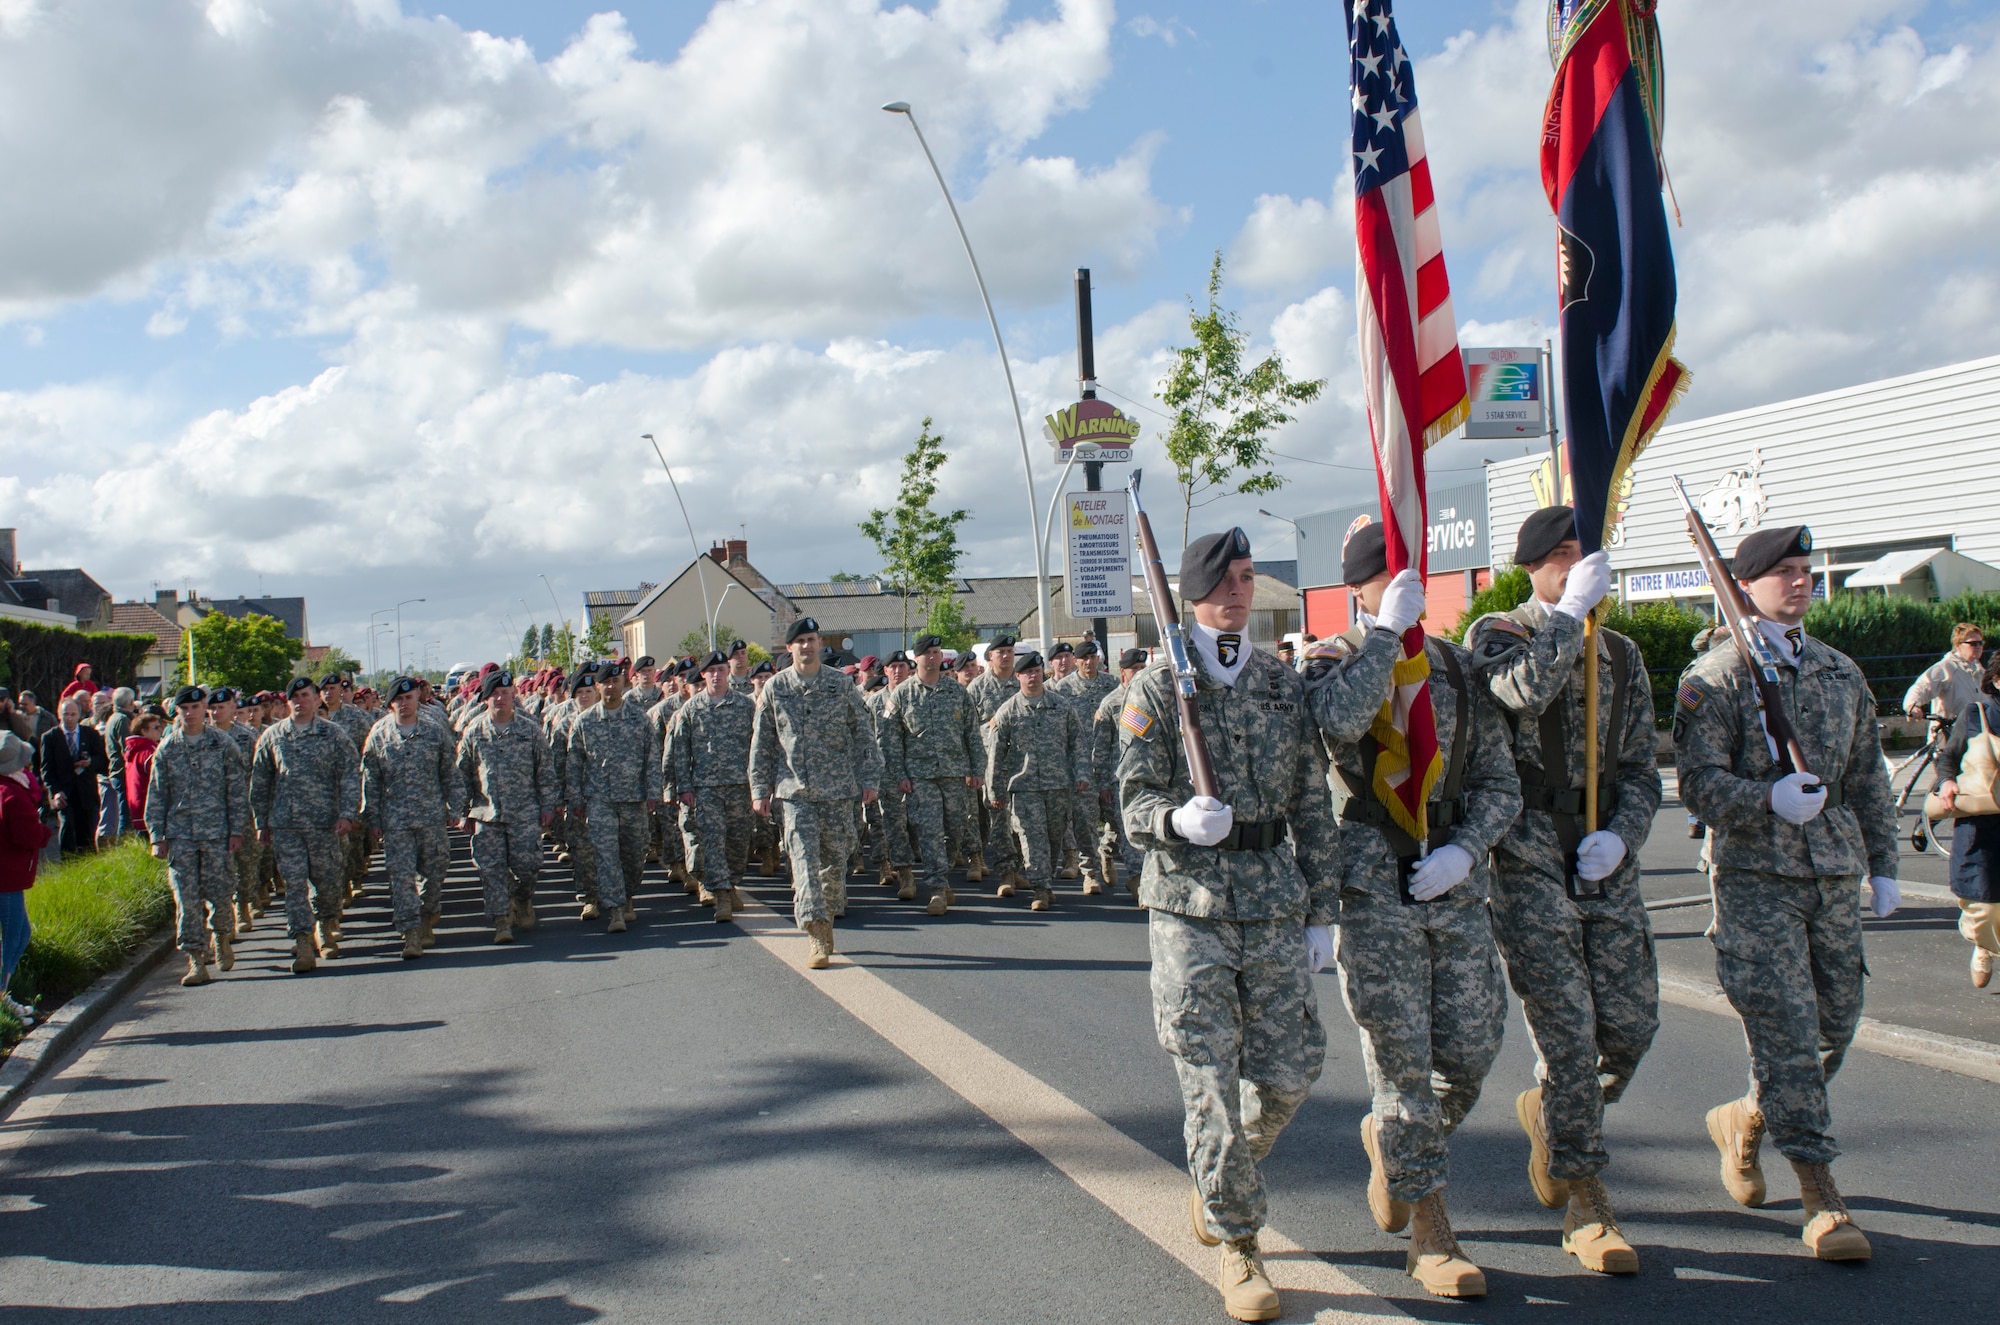 Soldiers from the 101st Airborne Division, along with allied troops from multiple countries, participate in a parade June 4, 2014, through the streets of Carentan, France. The town is hosting several events commemorating the 70th anniversary of D-Day operations conducted during World War II. (U.S. Army photo/Sgt. A.M. LaVey)